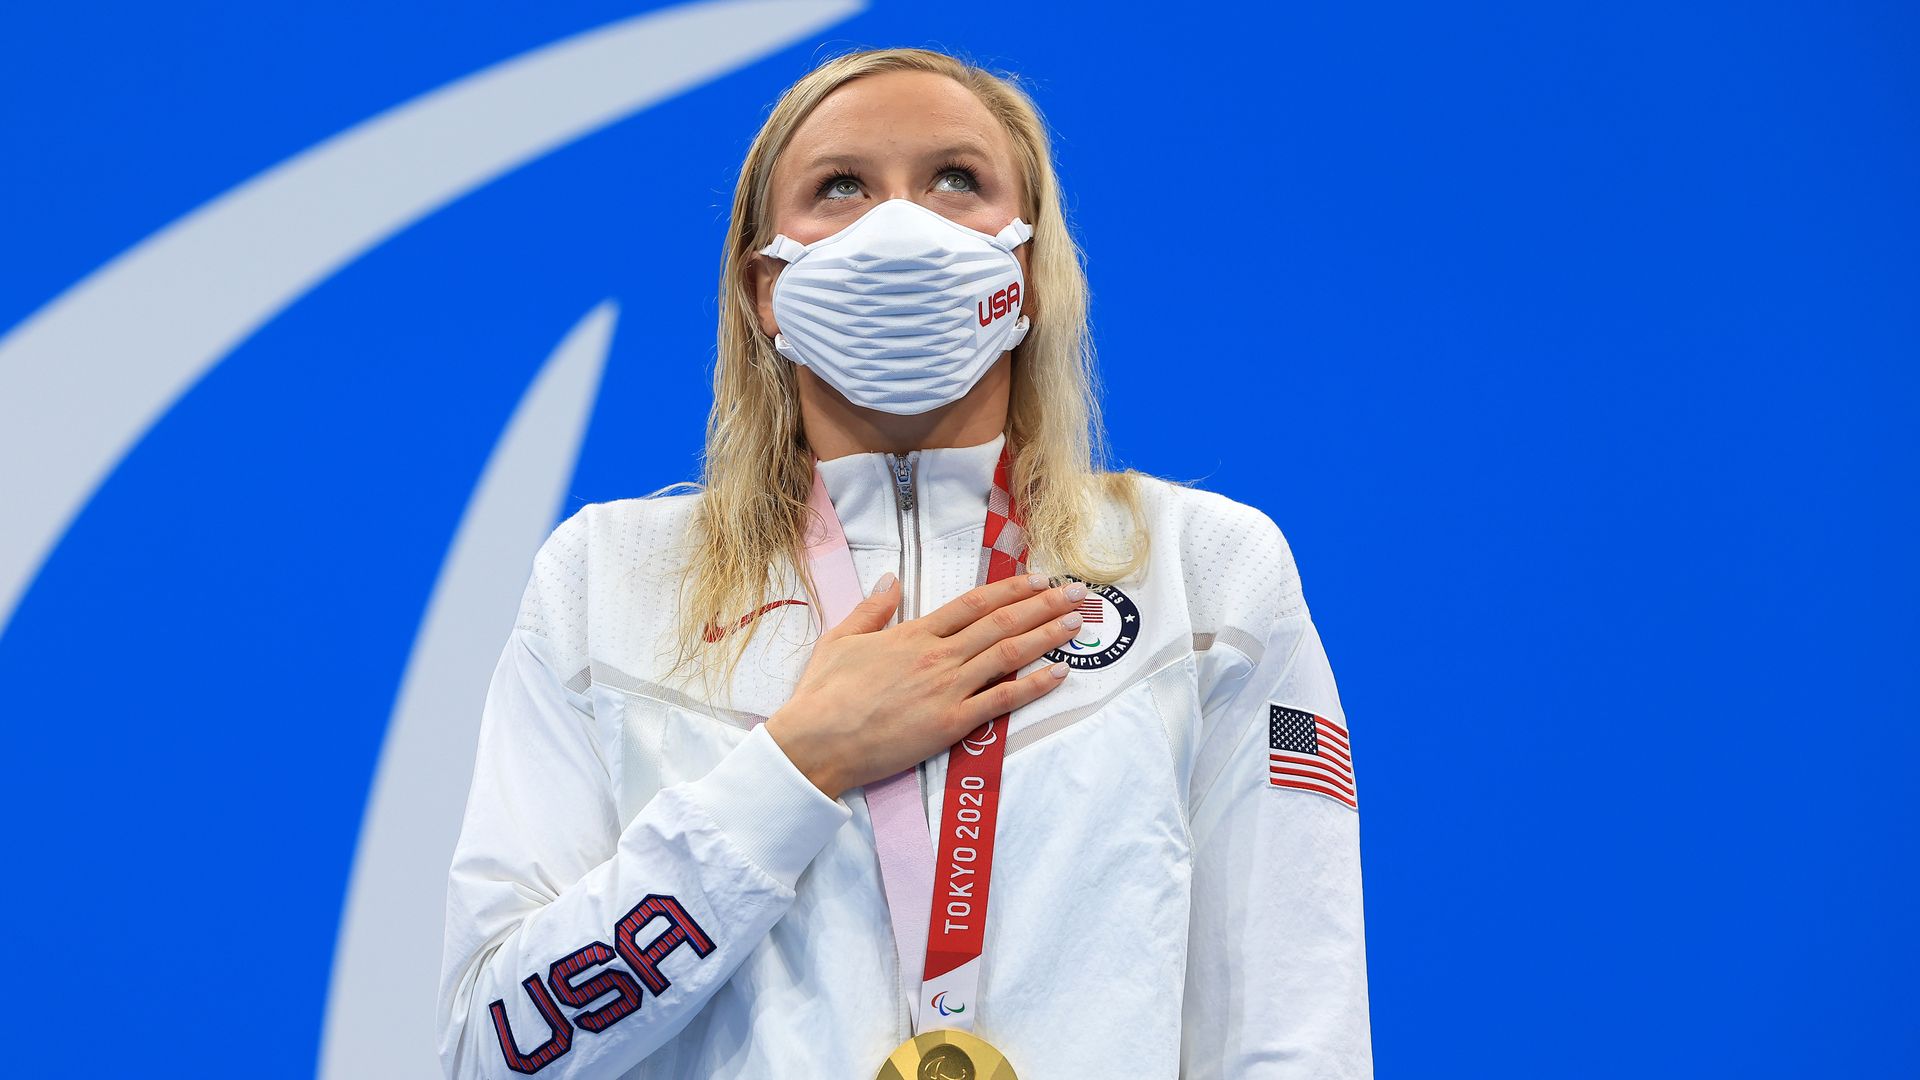  American gold medalist Jessica Long during the medal ceremony for the Women's 200m Individual Medley - SM8 Final at the Tokyo Paralympics  on August 28